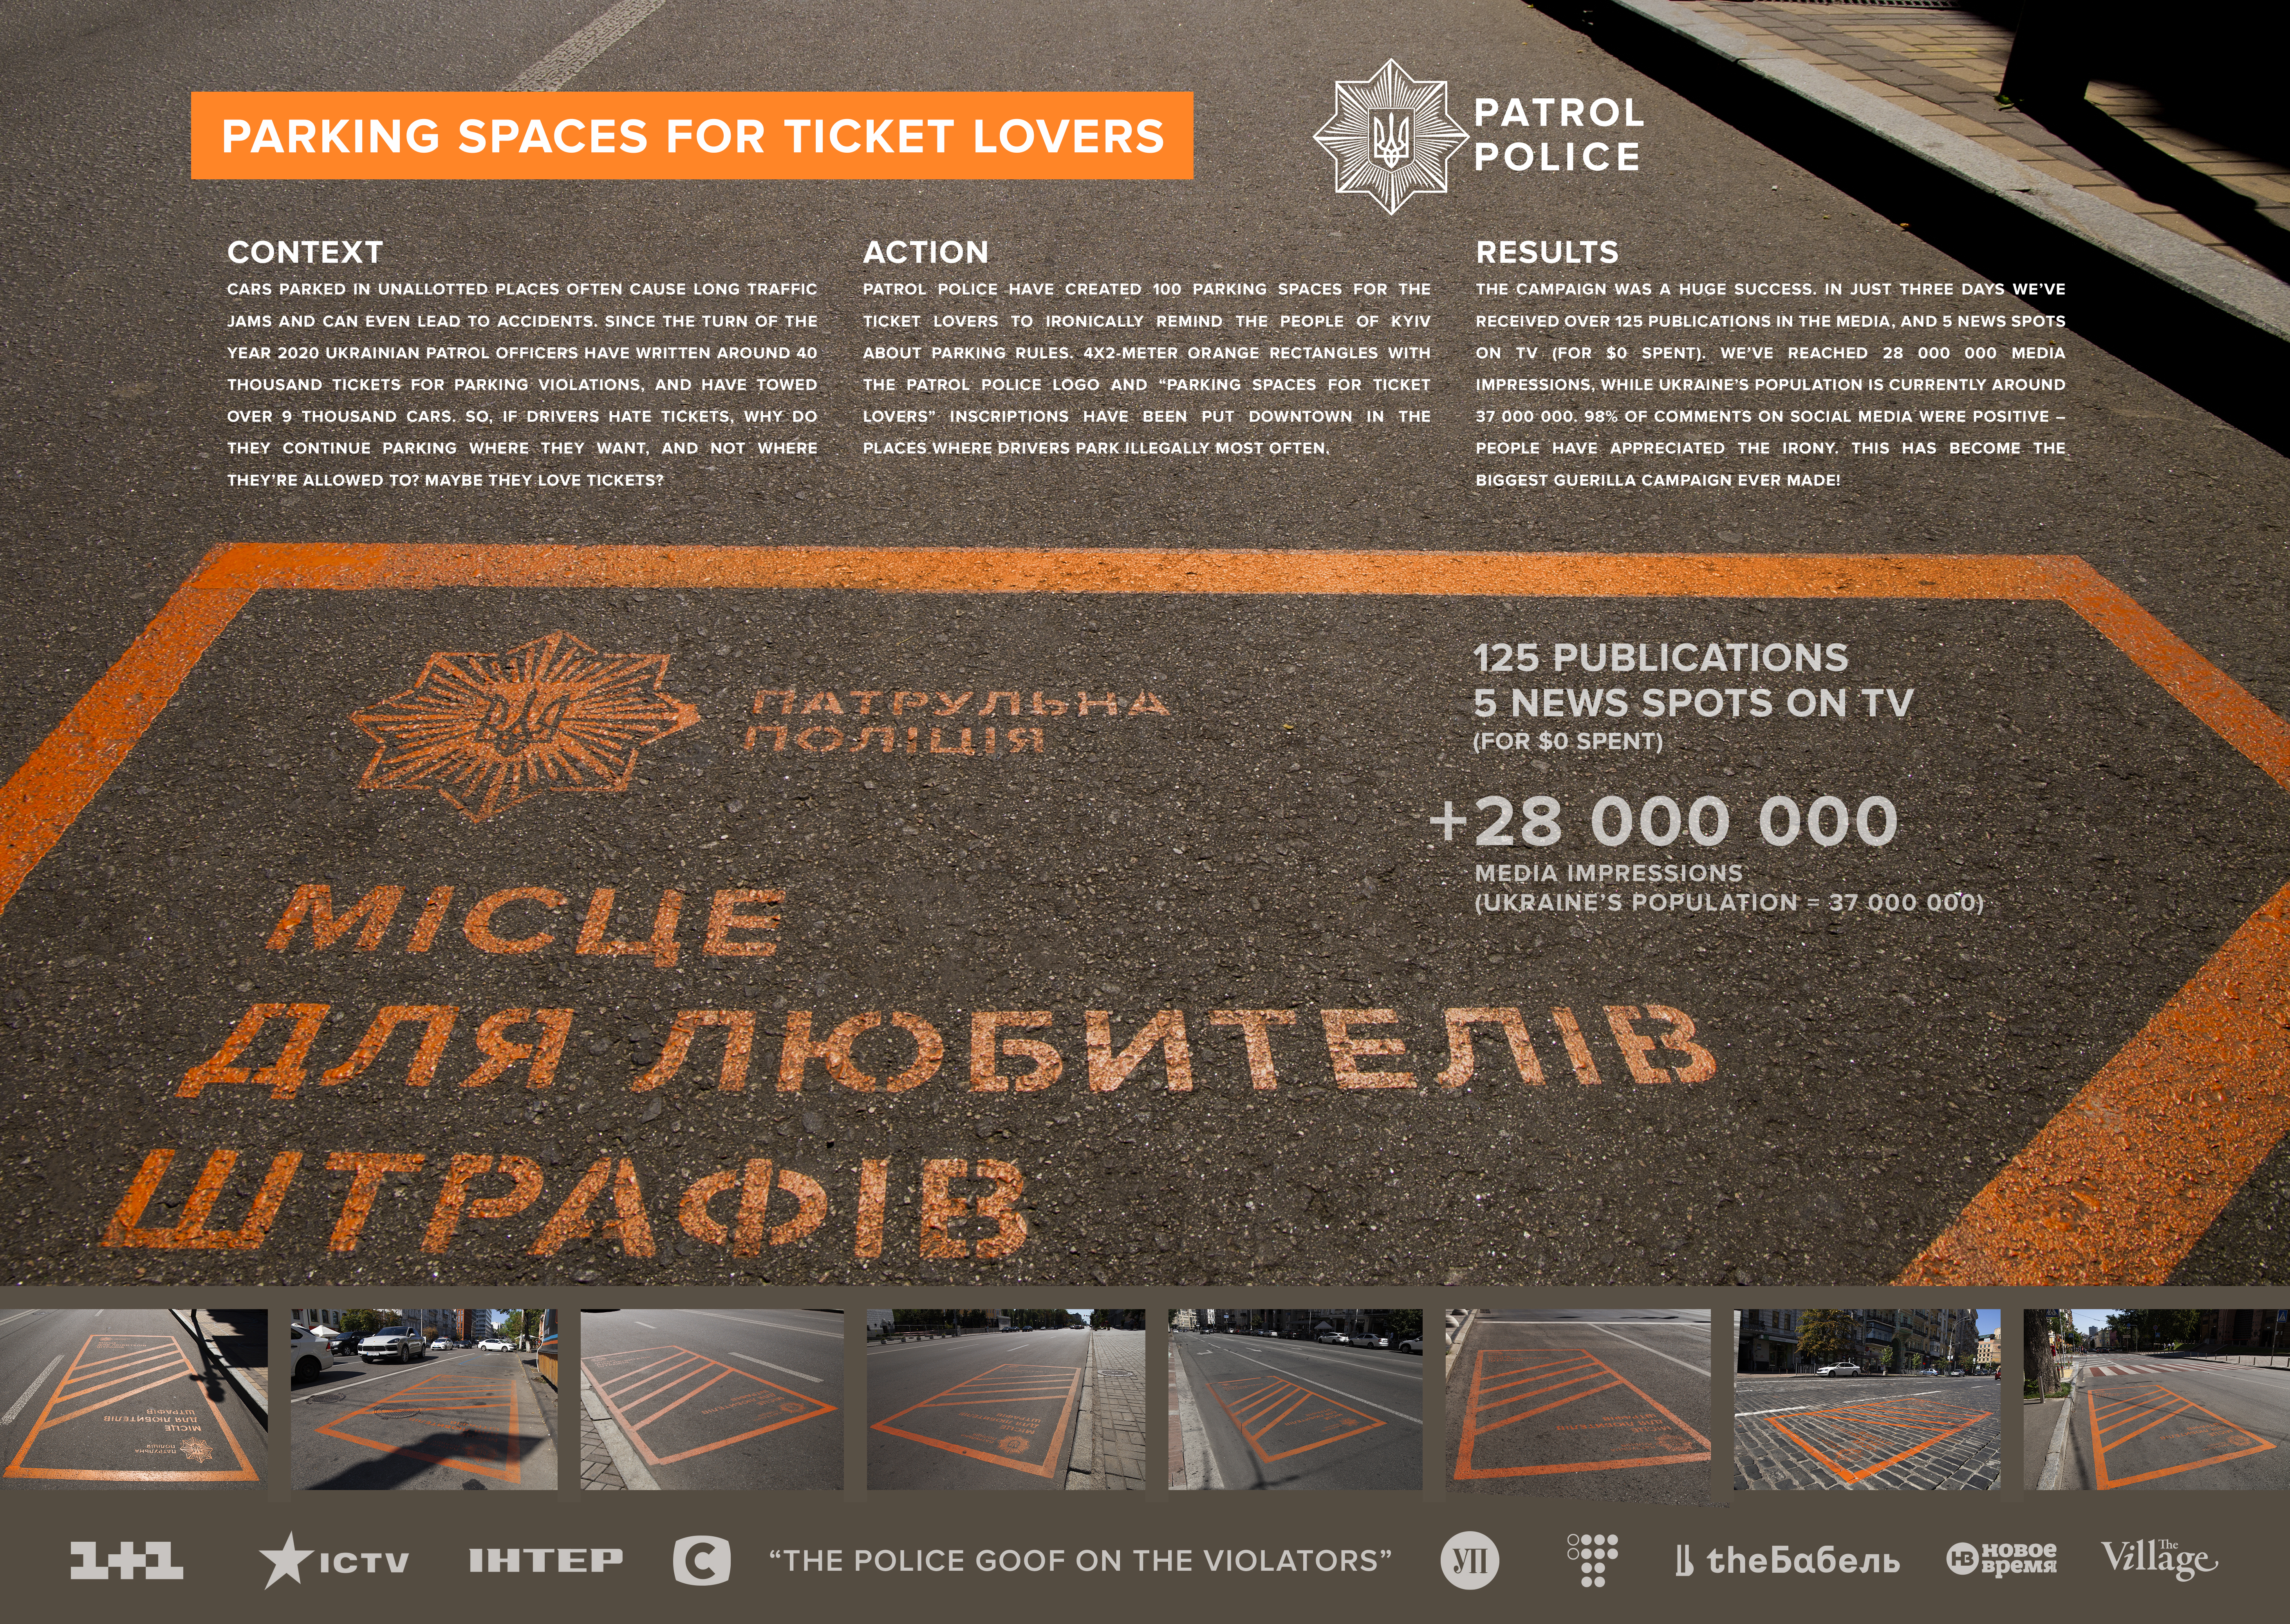 PARKING SPACES FOR TICKET LOVERS